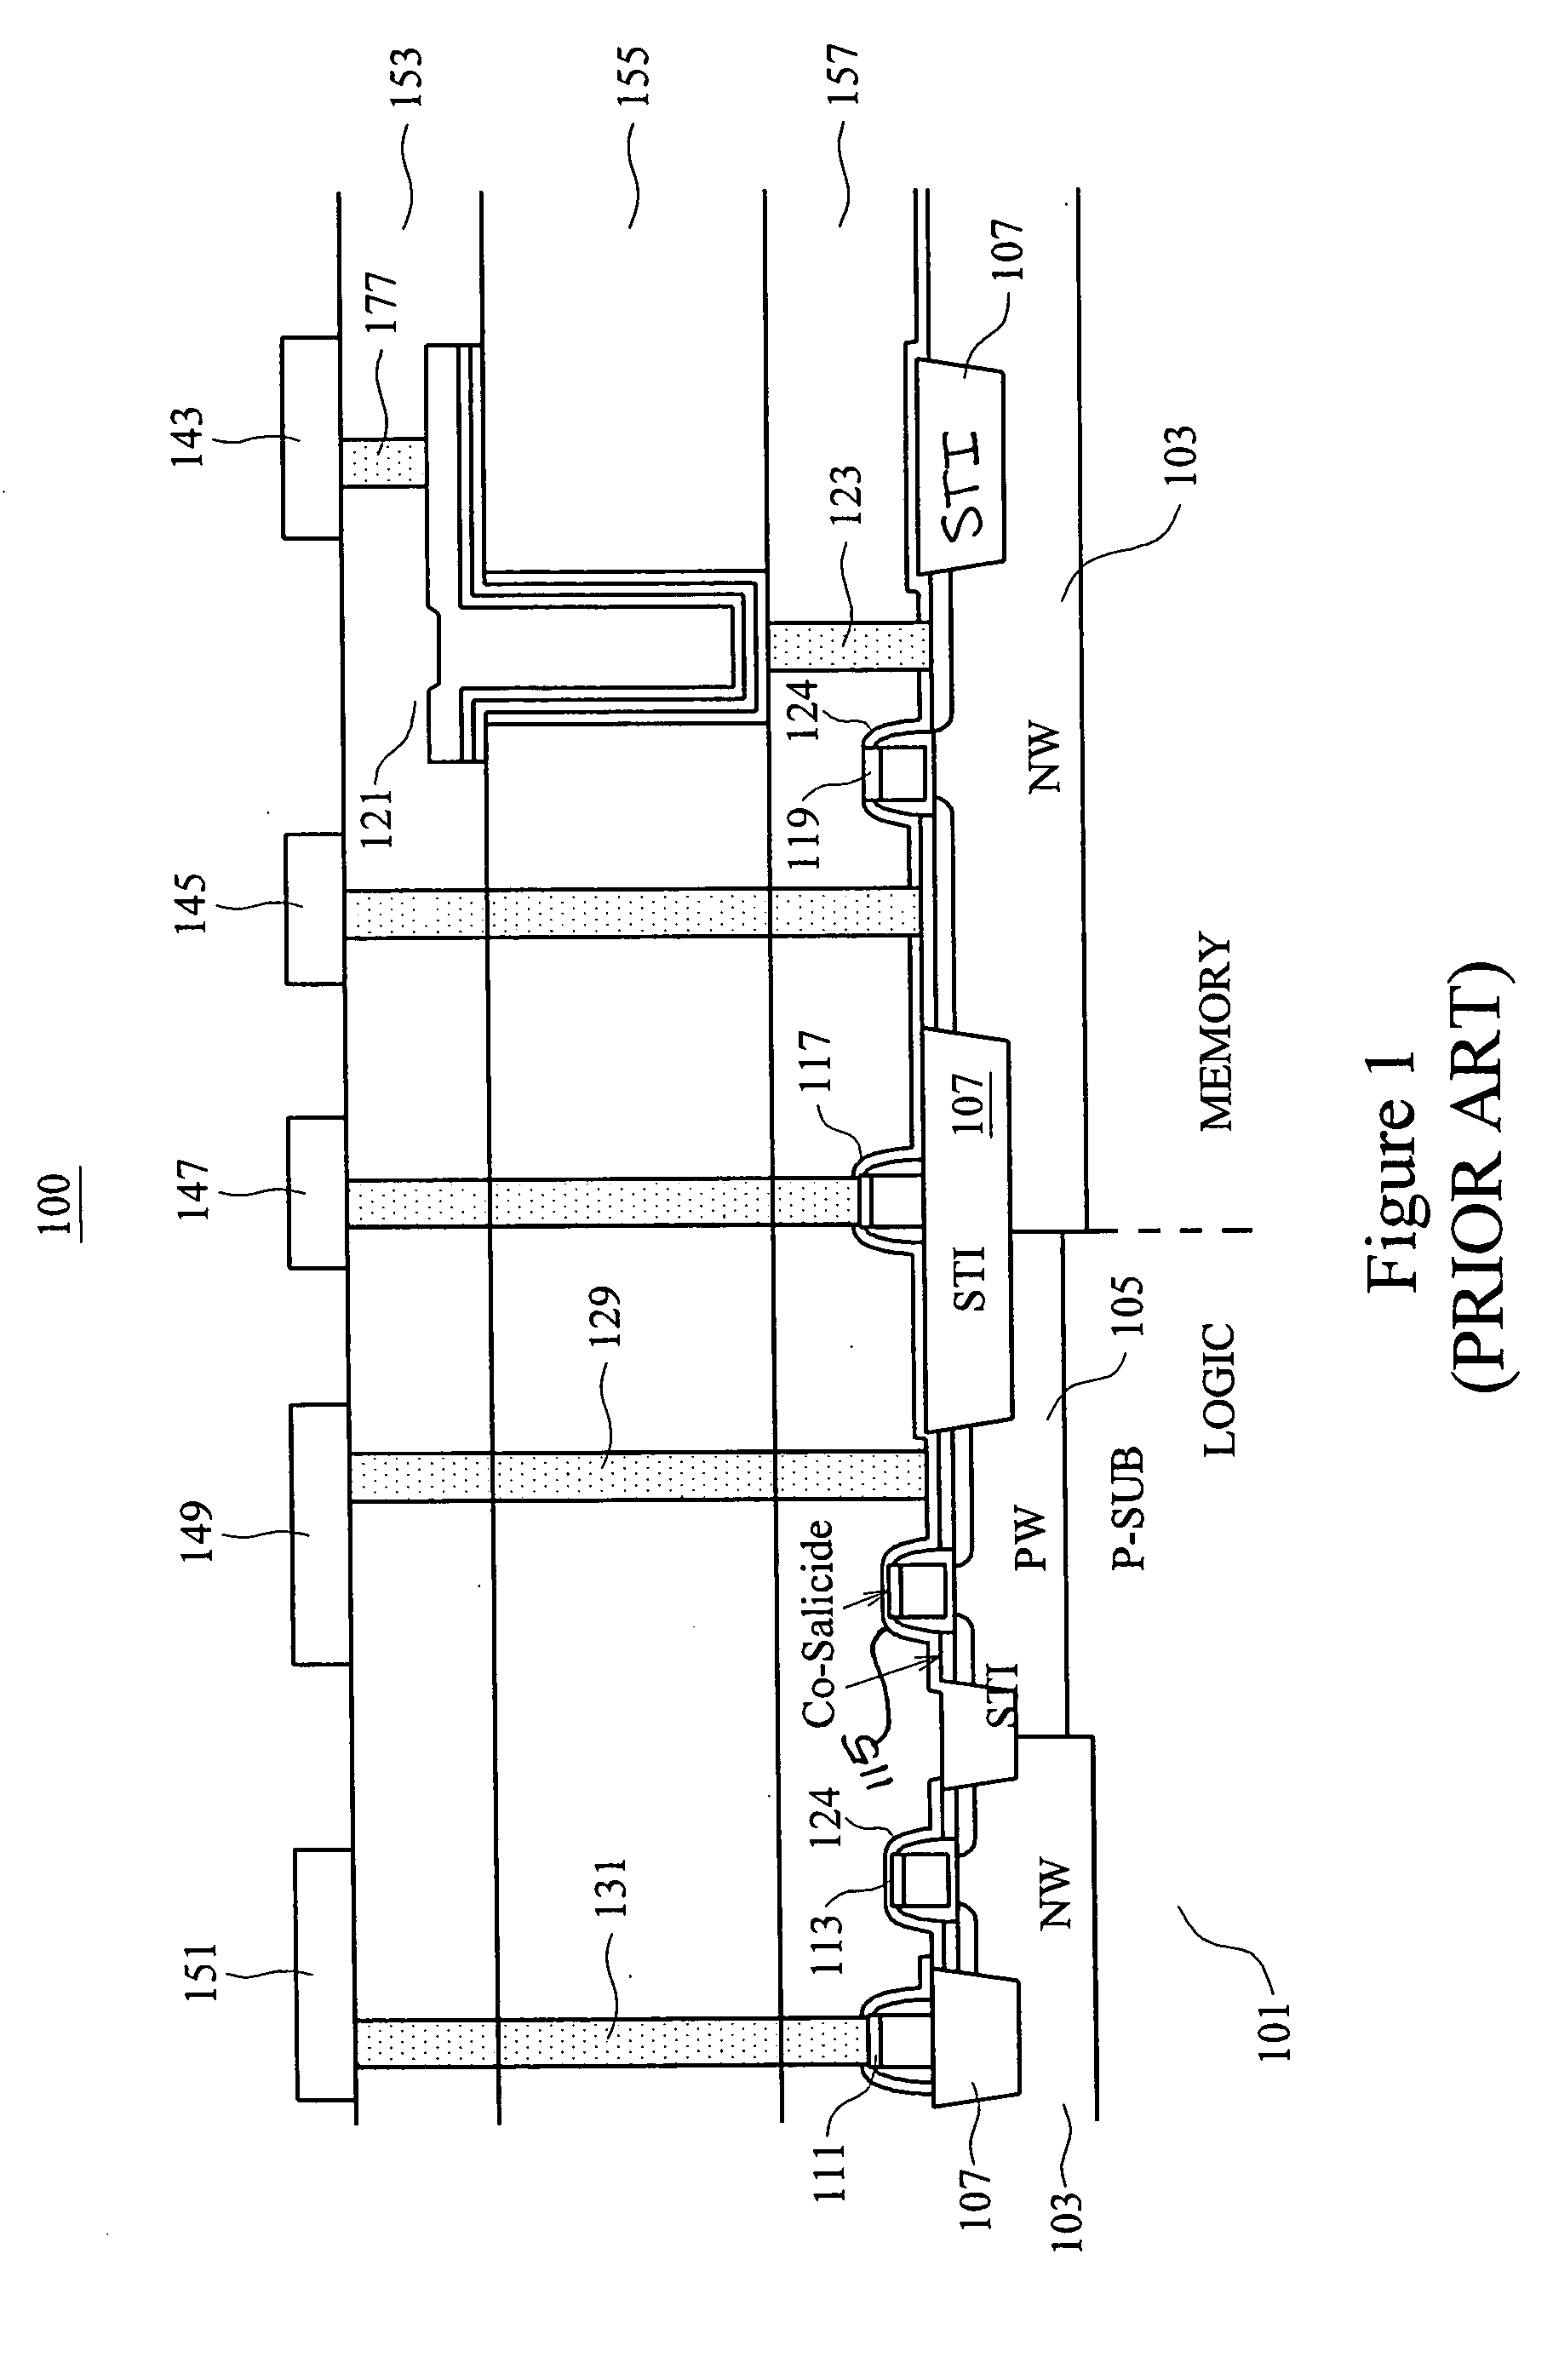 Method and structure for a 1T-RAM bit cell and macro